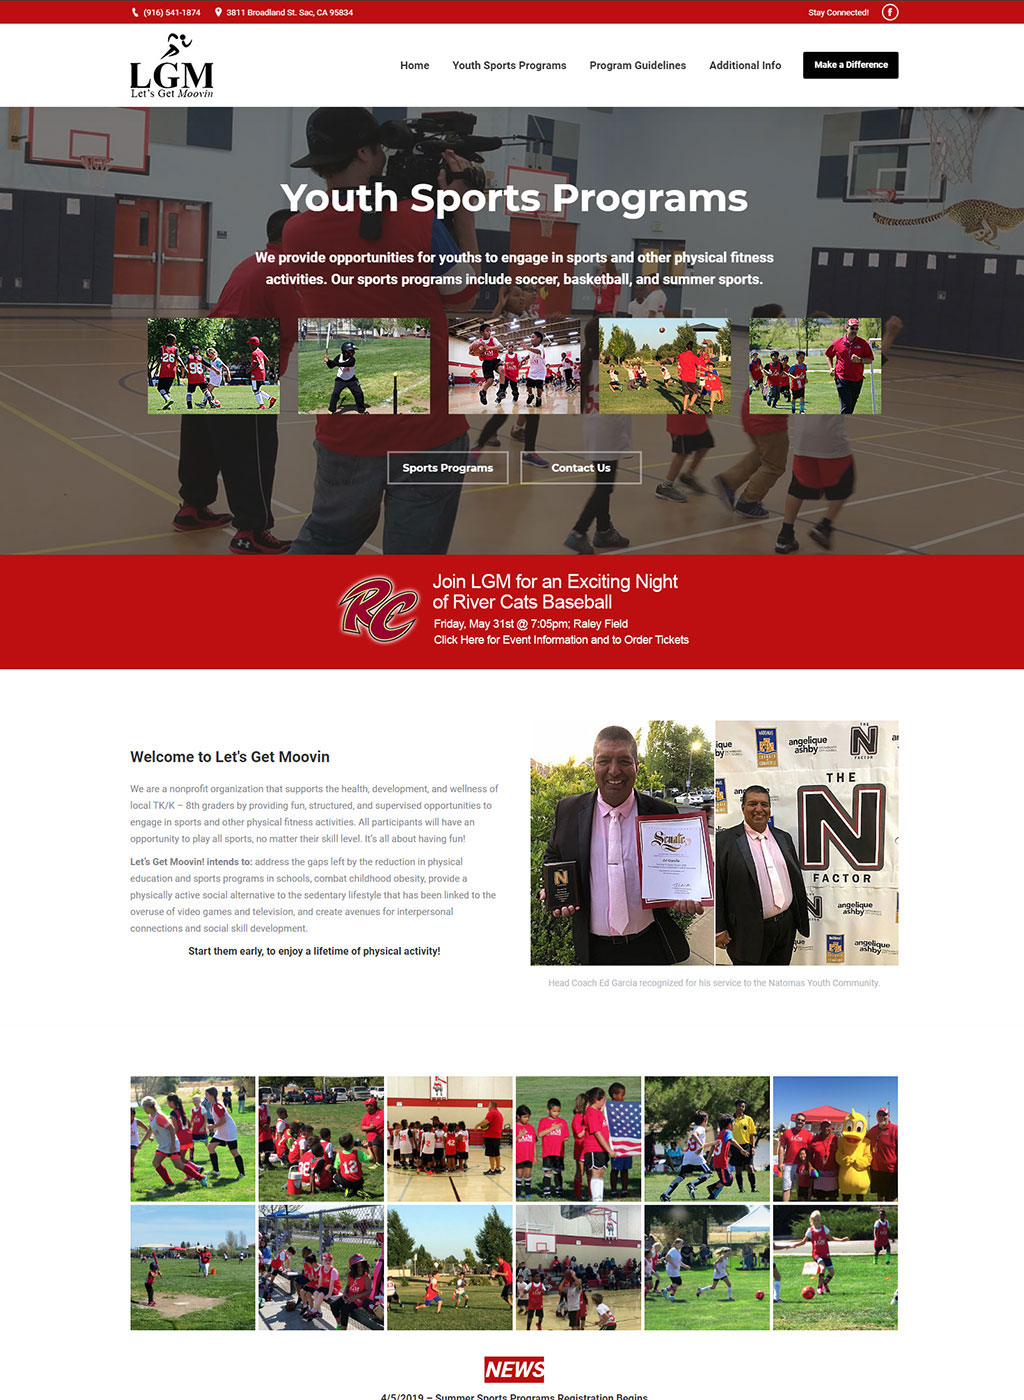 Website developed for Sacramento youth sports business